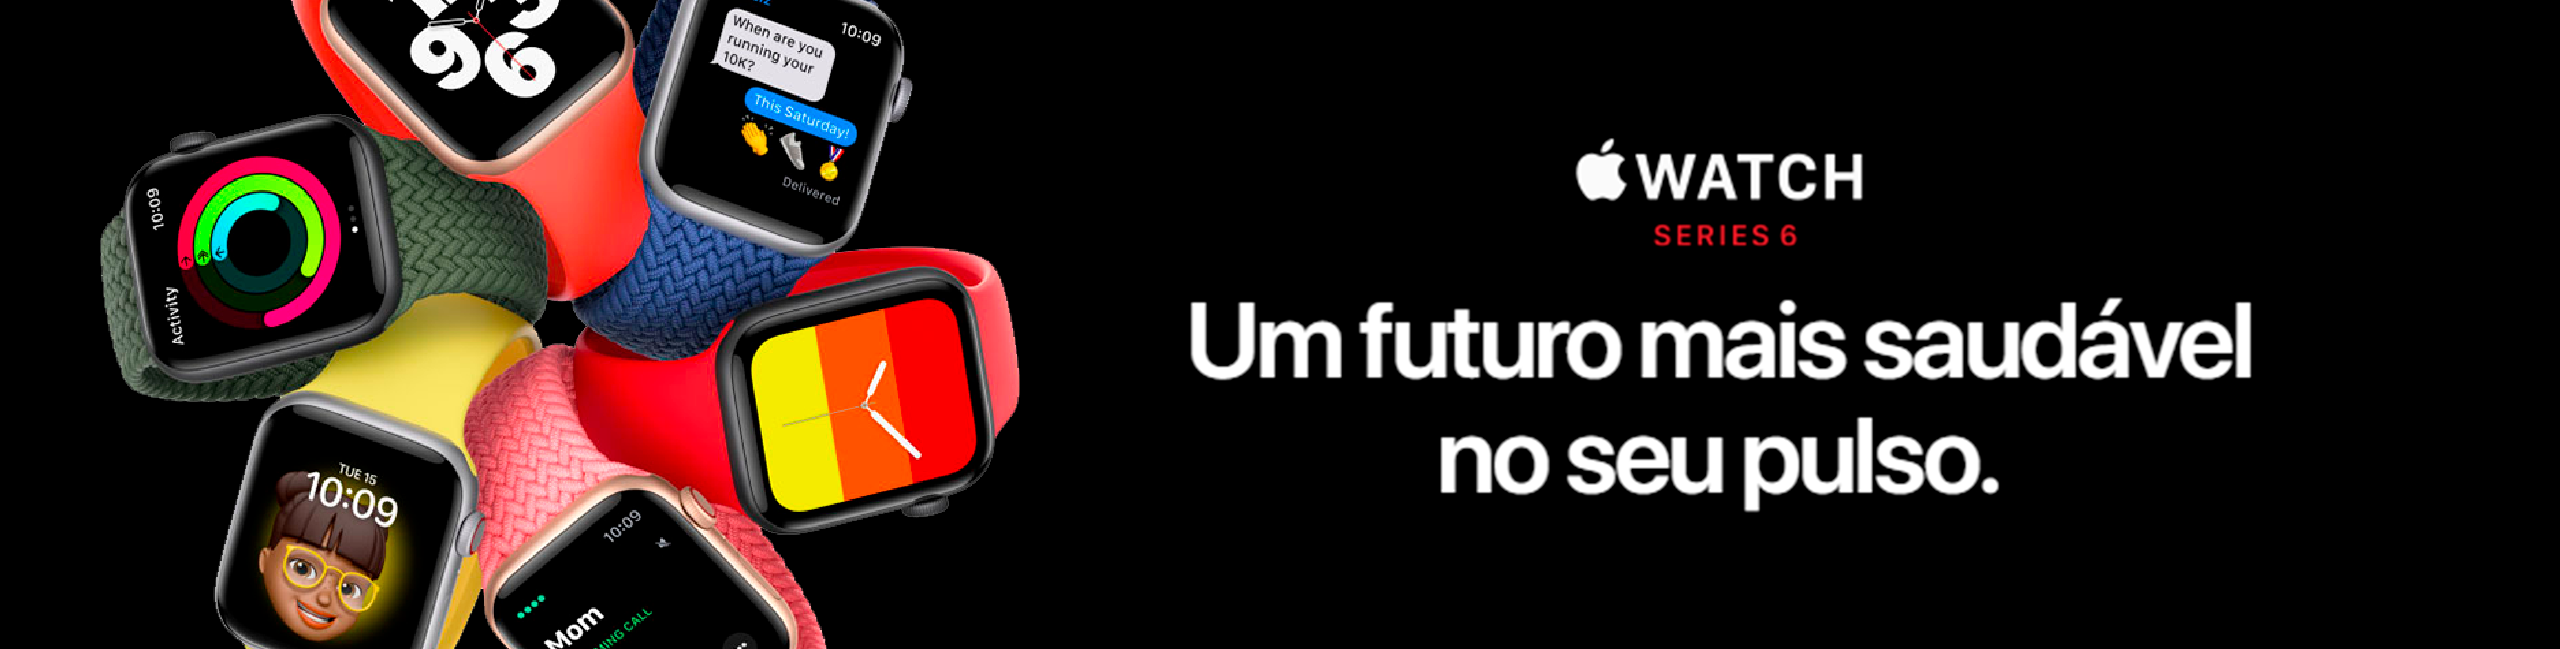 capa-apple-whatch.png